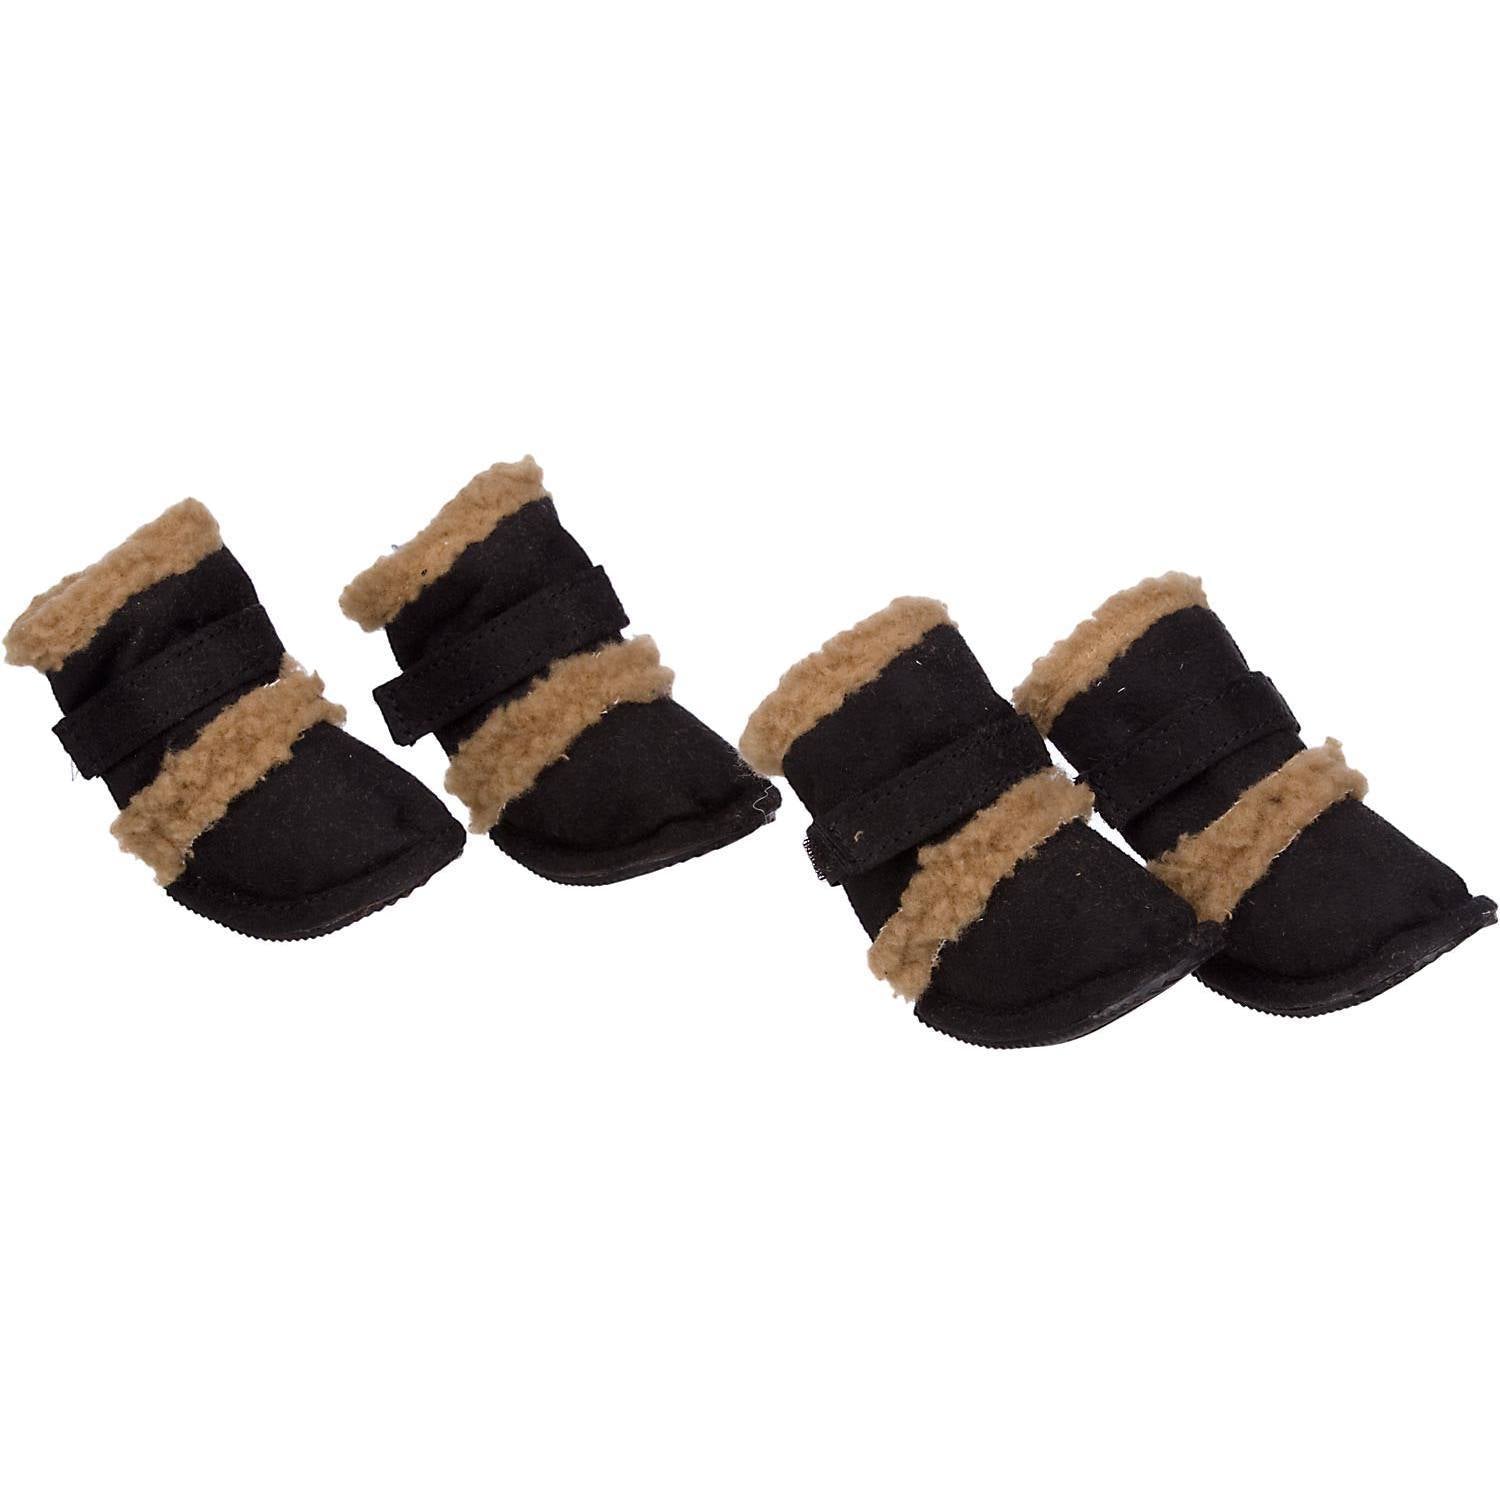 Pet Life ® 'Duggz' 3M Insulated Winter Fashion Dog Shoes Booties - Set of 4 X-Small Black & Brown